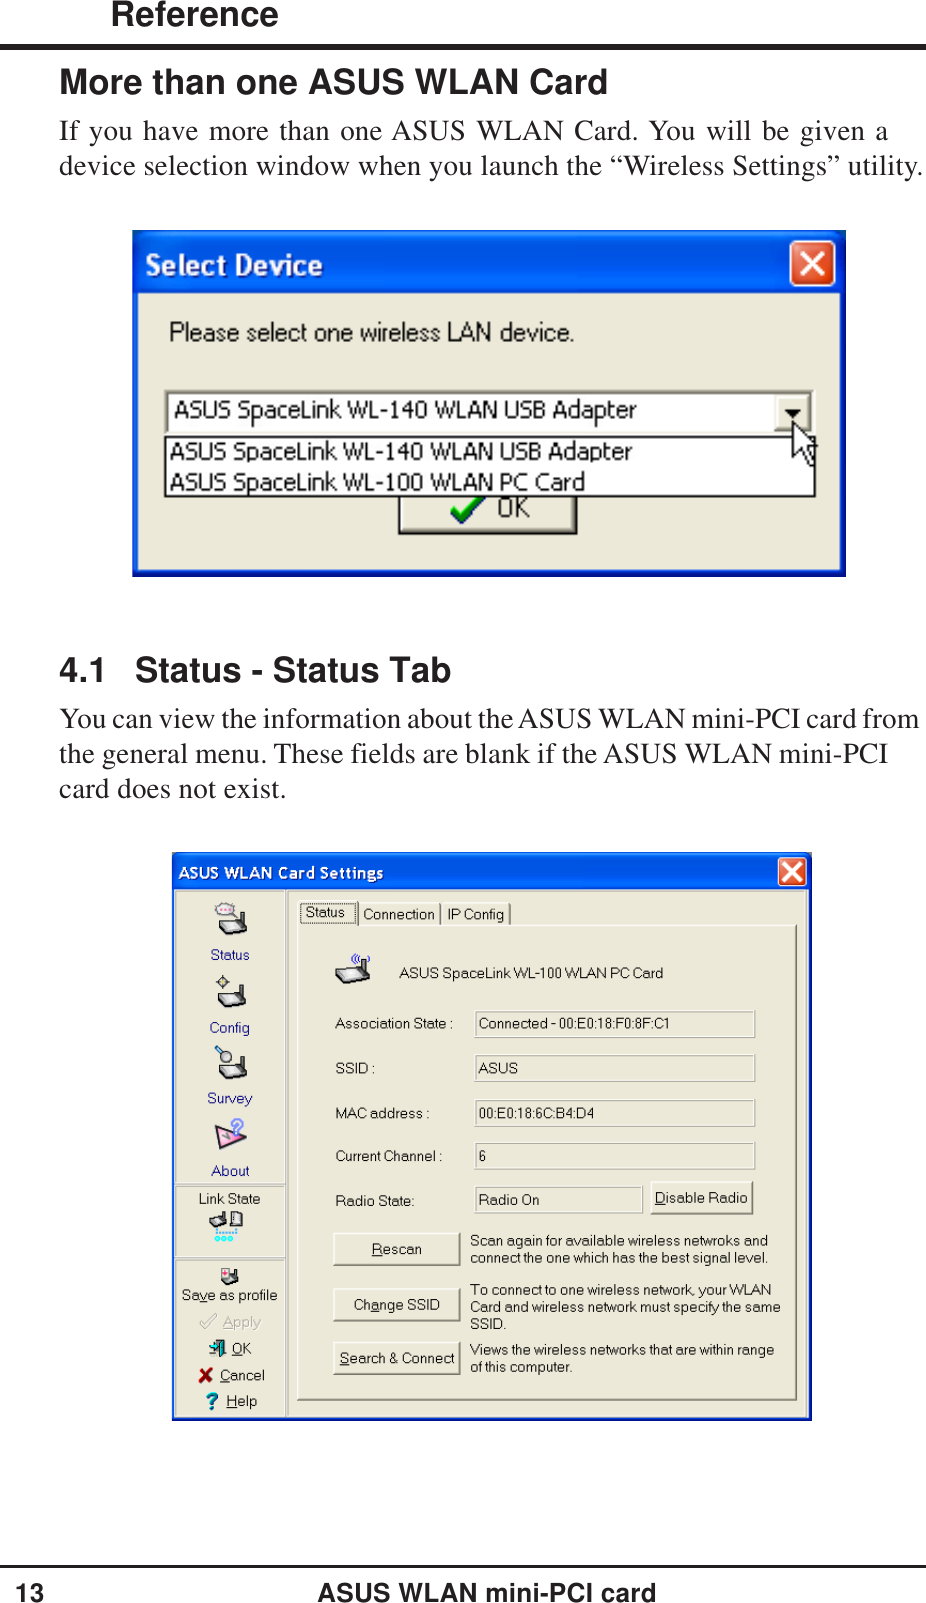 13ASUS WLAN mini-PCI card ReferenceChapter 34.1 Status - Status TabYou can view the information about the ASUS WLAN mini-PCI card fromthe general menu. These fields are blank if the ASUS WLAN mini-PCI card does not exist.More than one ASUS WLAN CardIf you have more than one ASUS WLAN Card. You will be given adevice selection window when you launch the “Wireless Settings” utility.